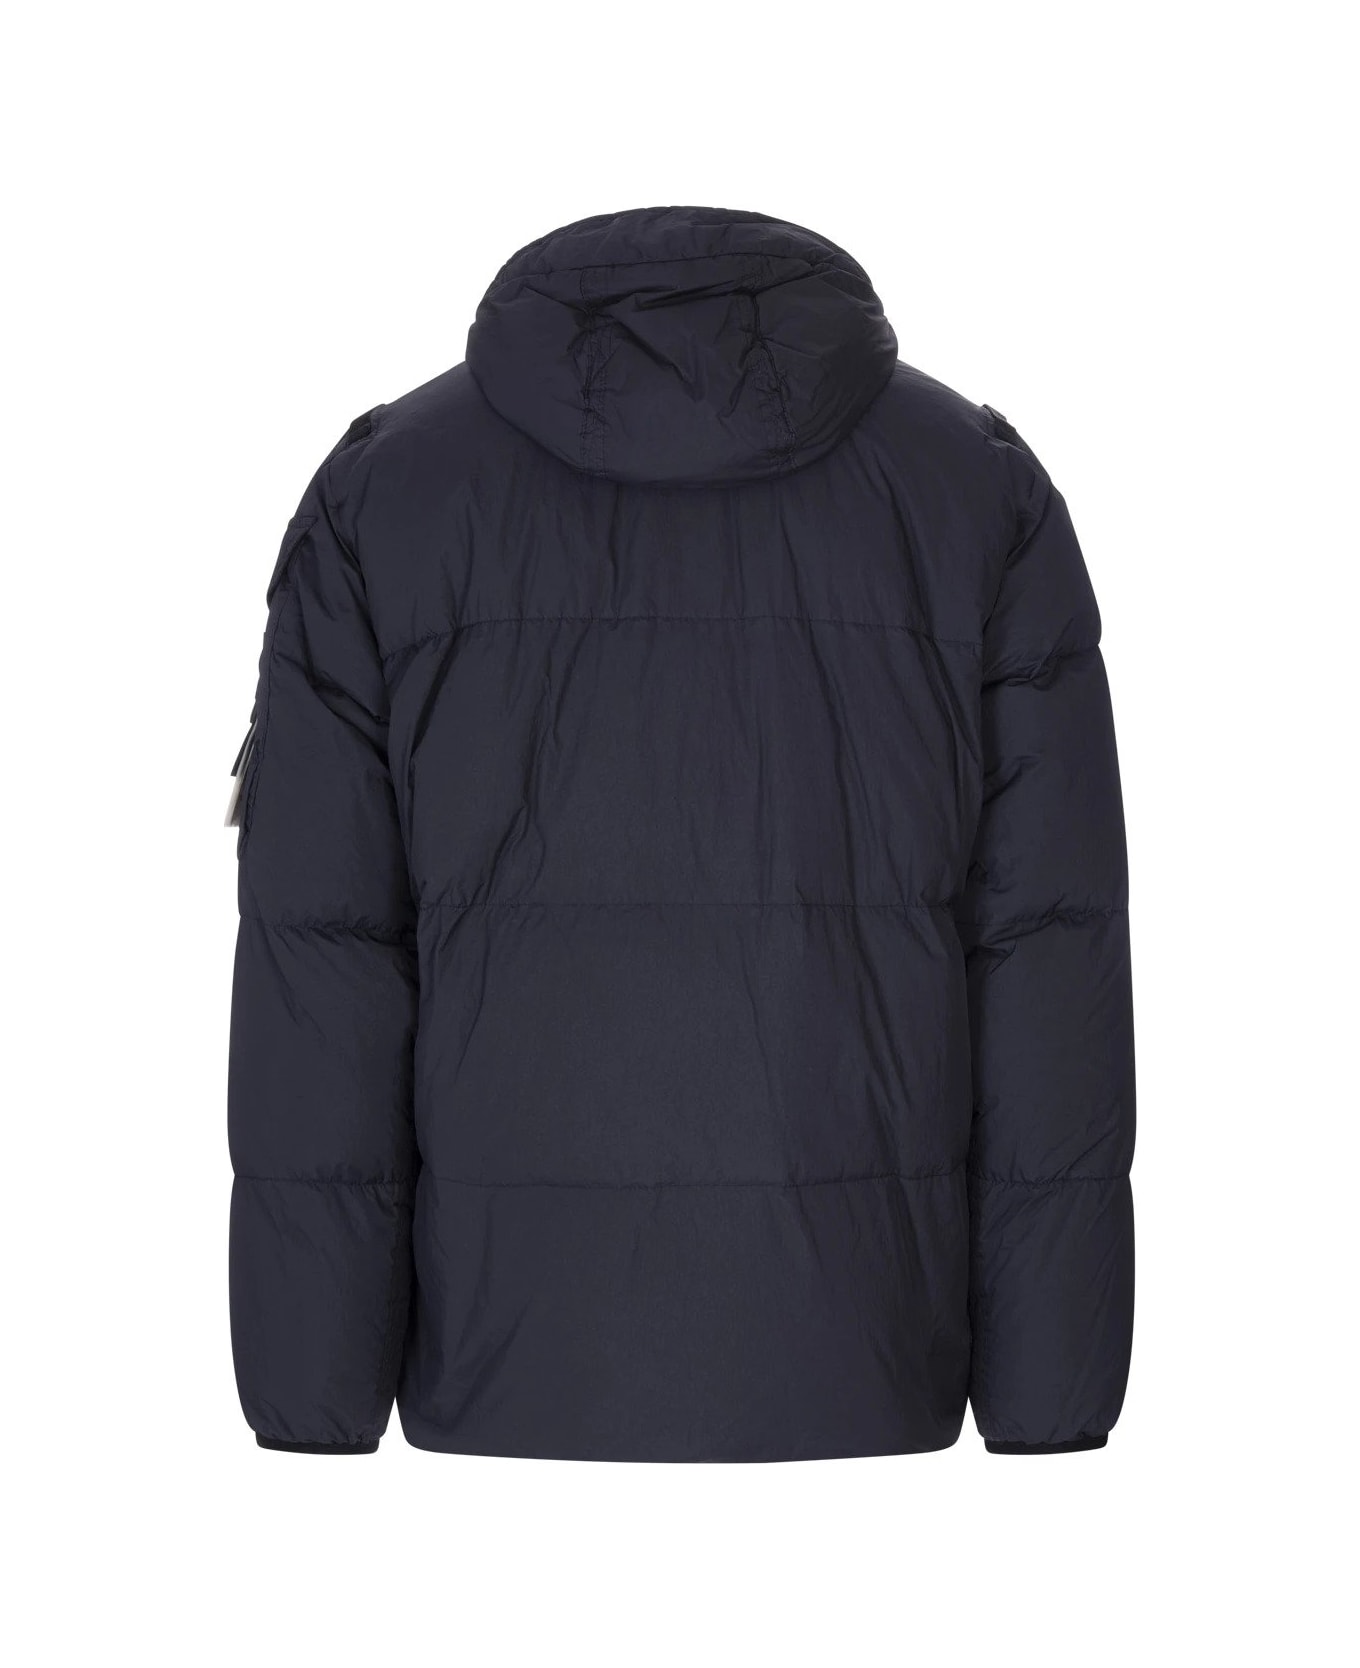 Stone Island Garment Dyed Crinkle Reps R-ny Down Jacket